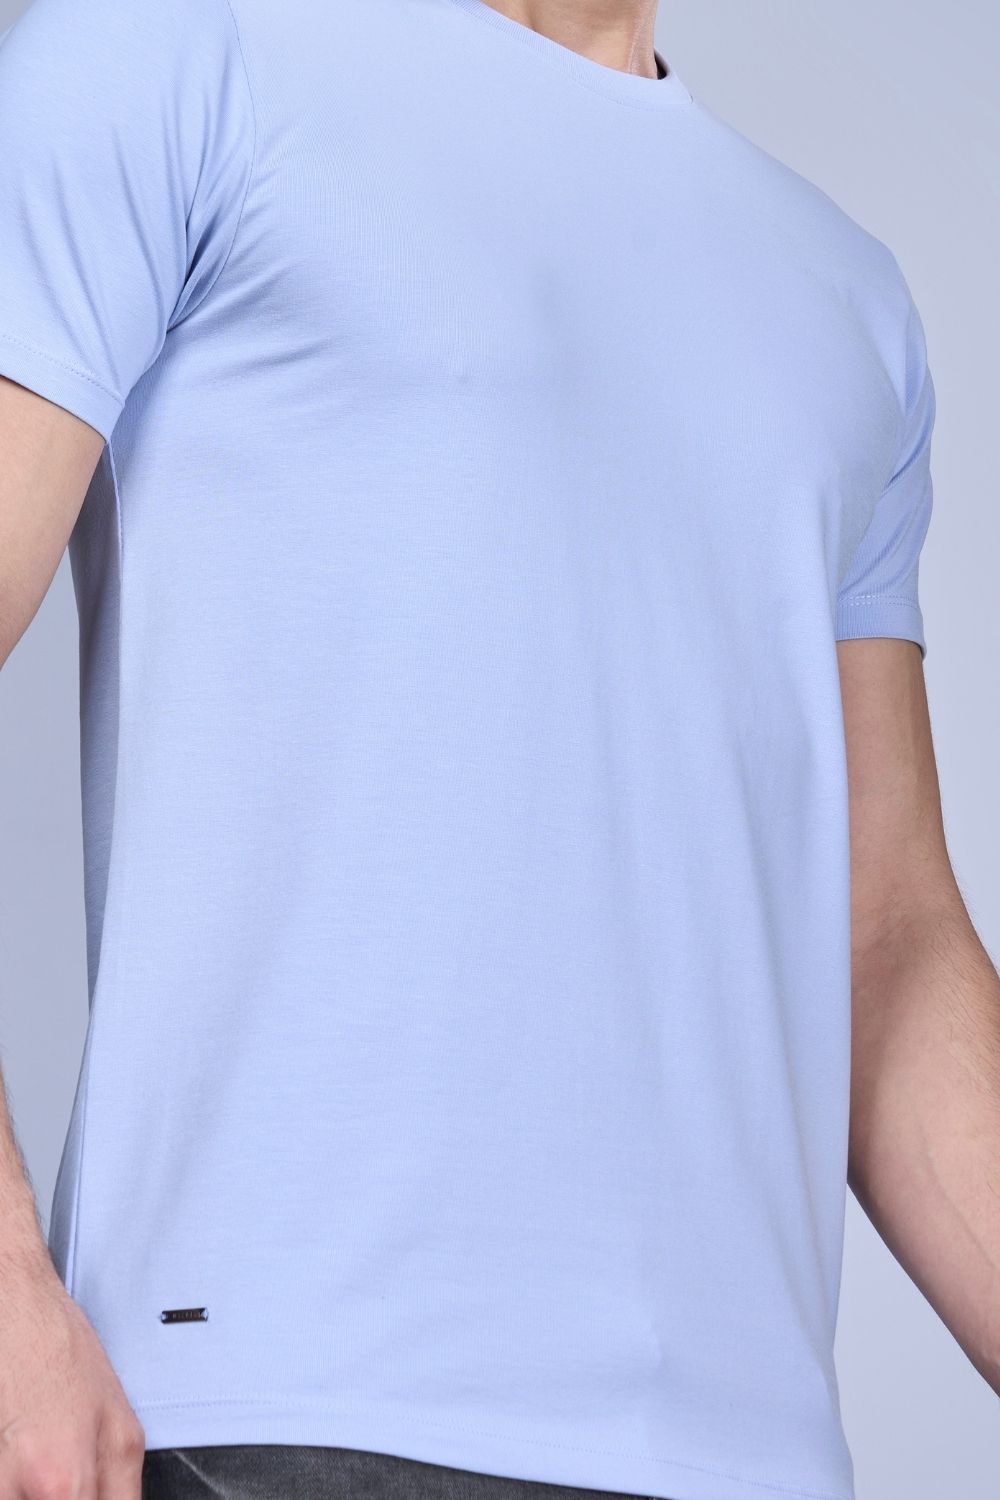 Cotton Stretch T shirt for men in the the solid color Powder Blue with half sleeves and round neck, close up.